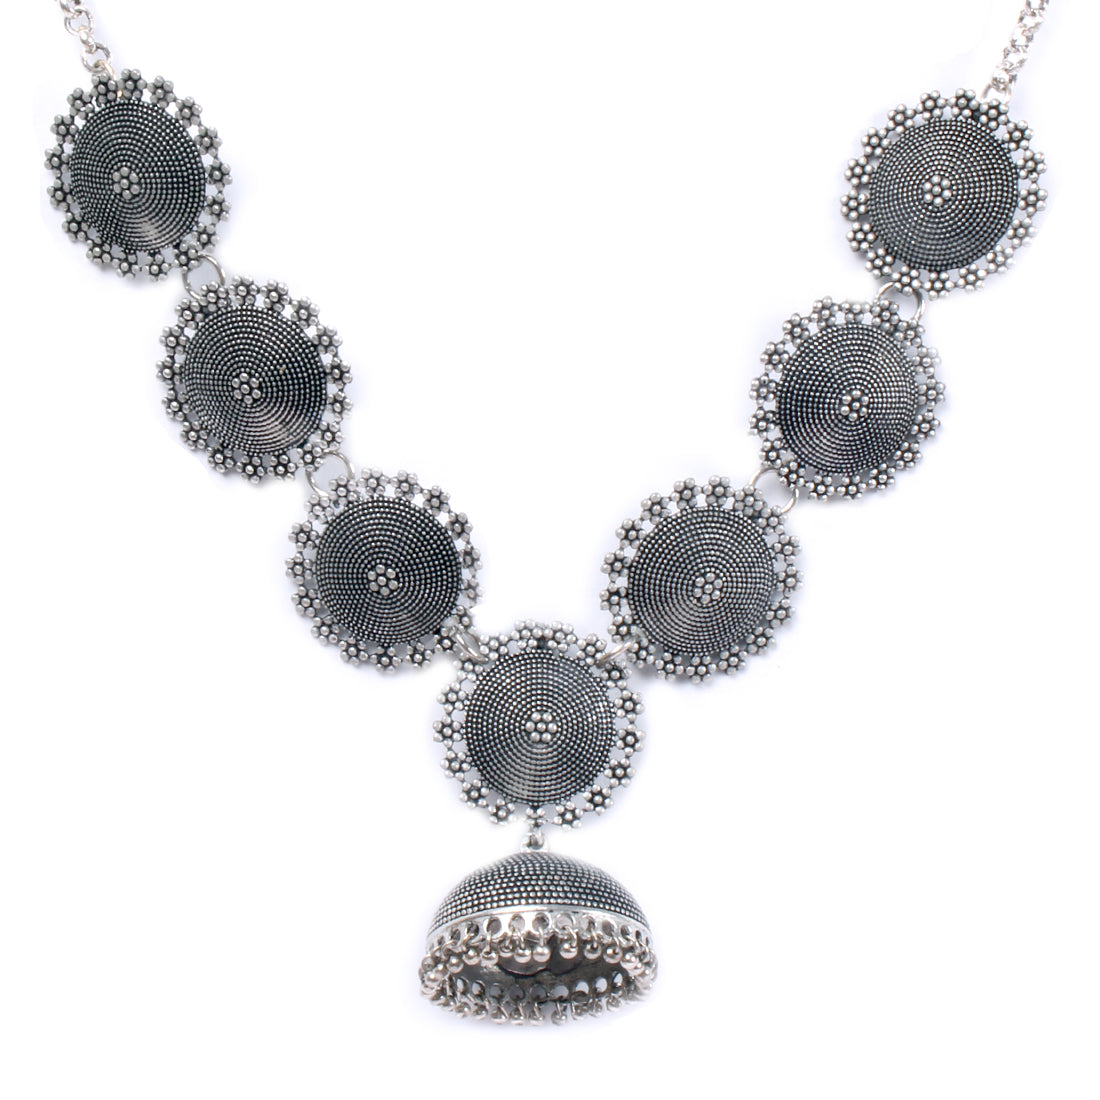 STATEMENT HANDCRAFTED ETHNIC SILVER-TONED CIRCULAR PENDANT ENGRAVED CHOKER NECKLACE